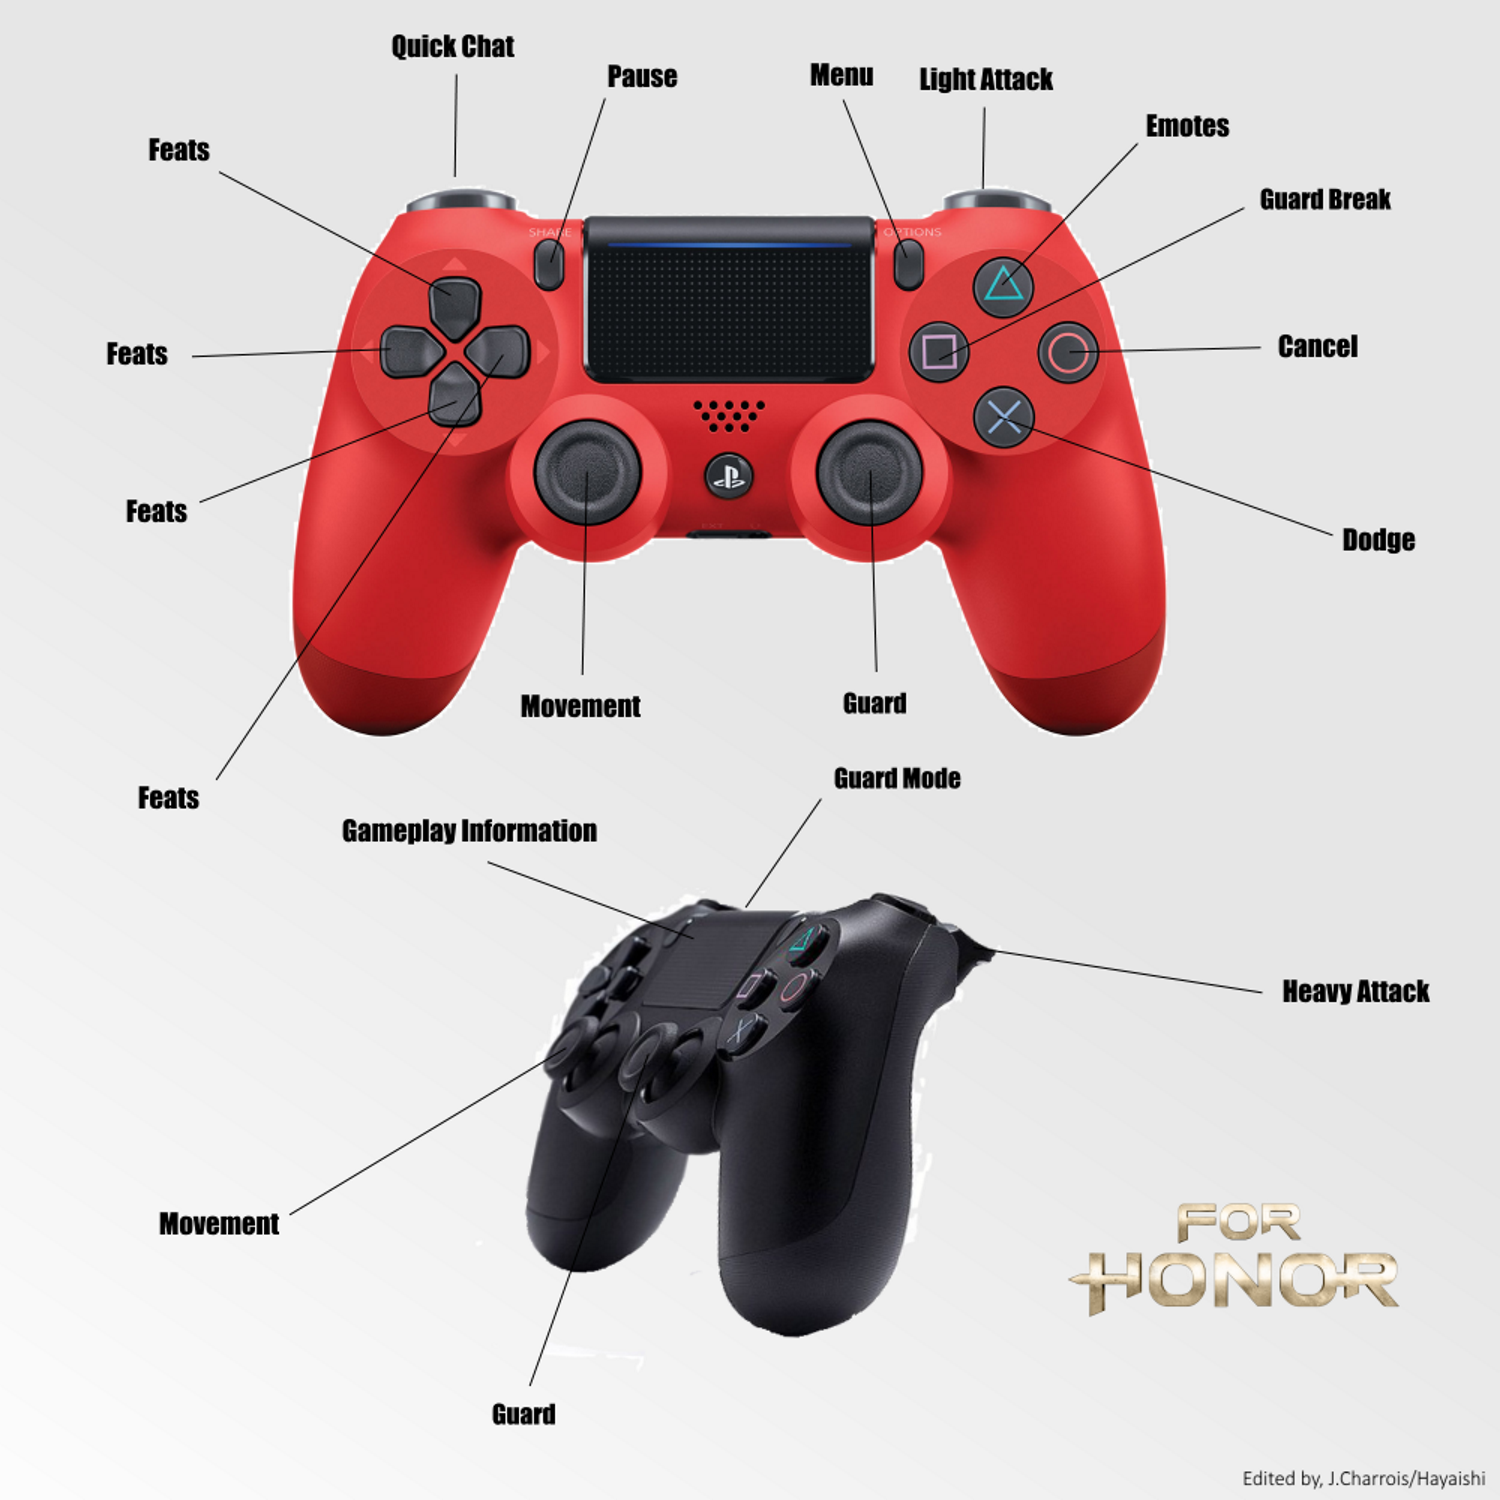 Controls, For Honor Wiki